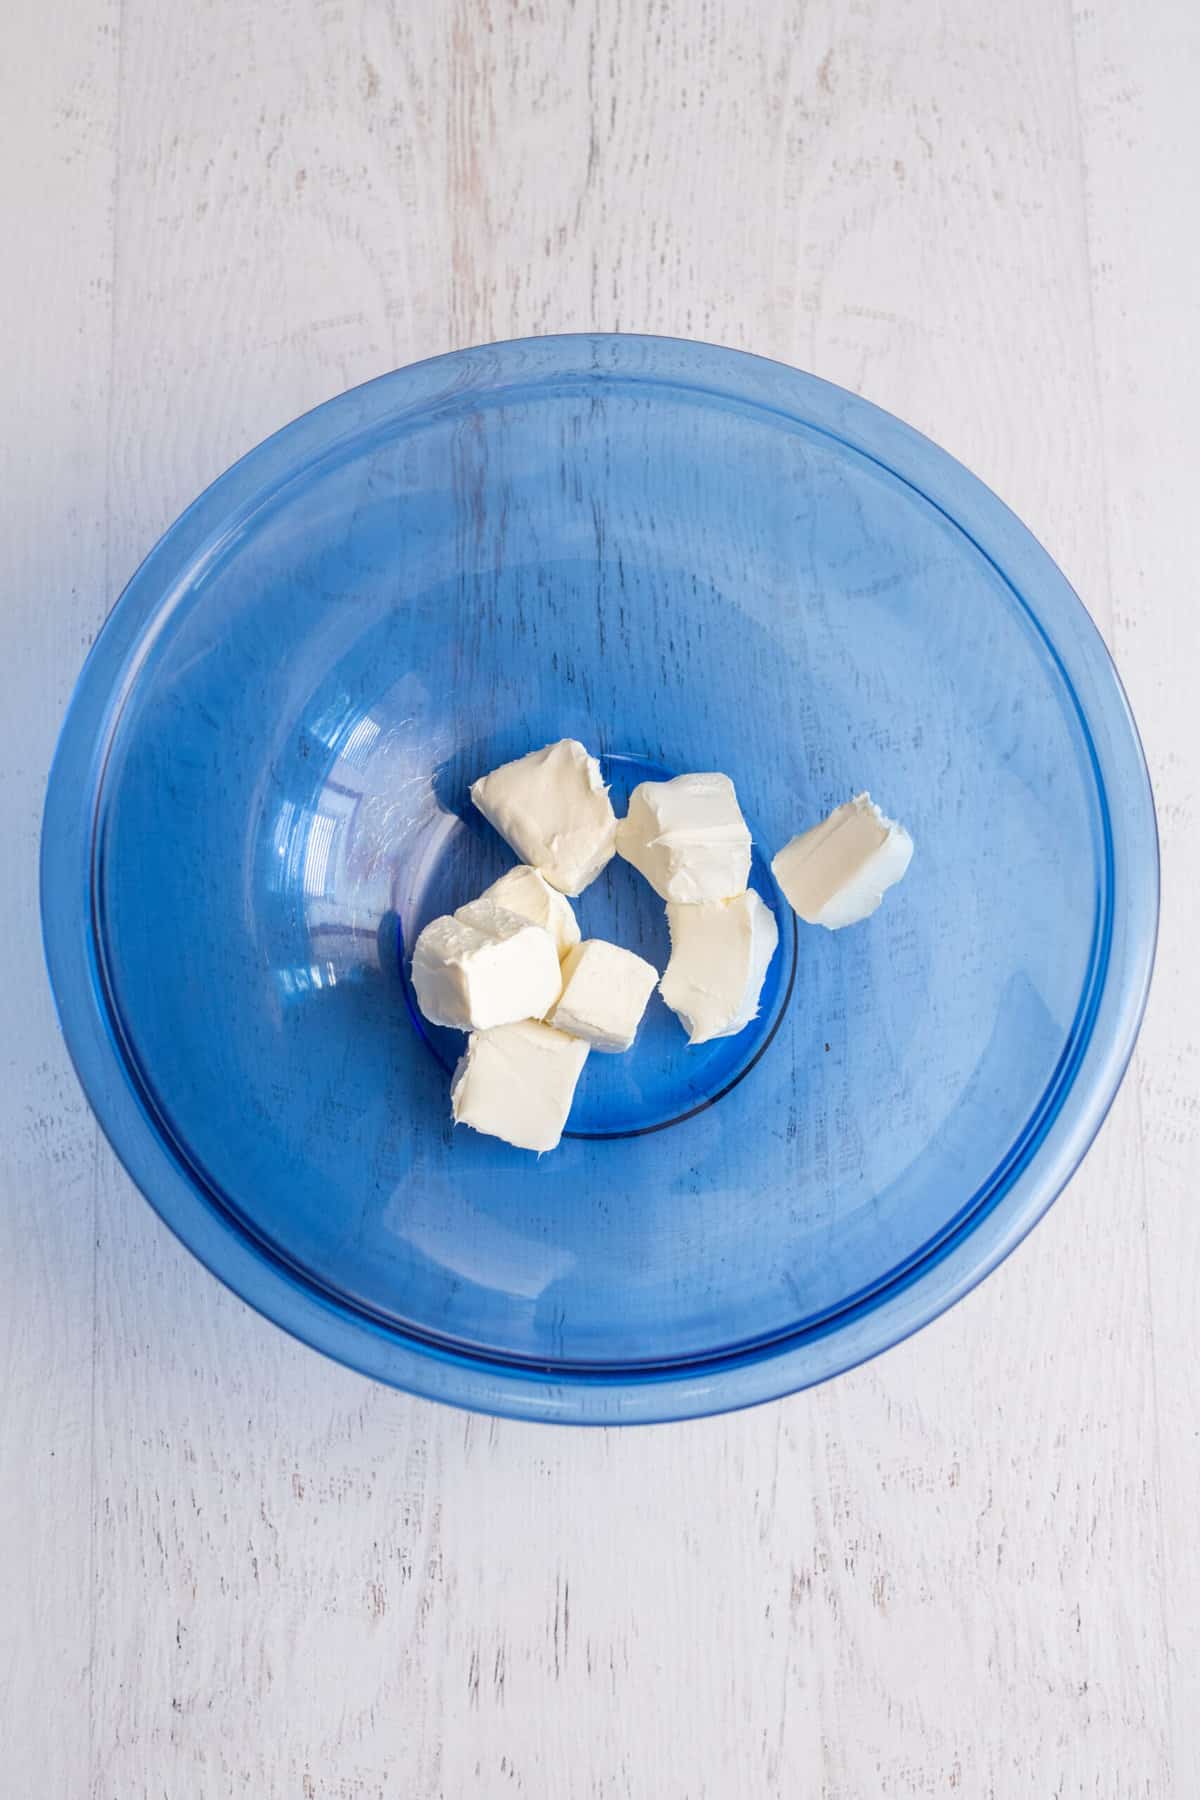 Place cubes of cream cheese in a large bowl.